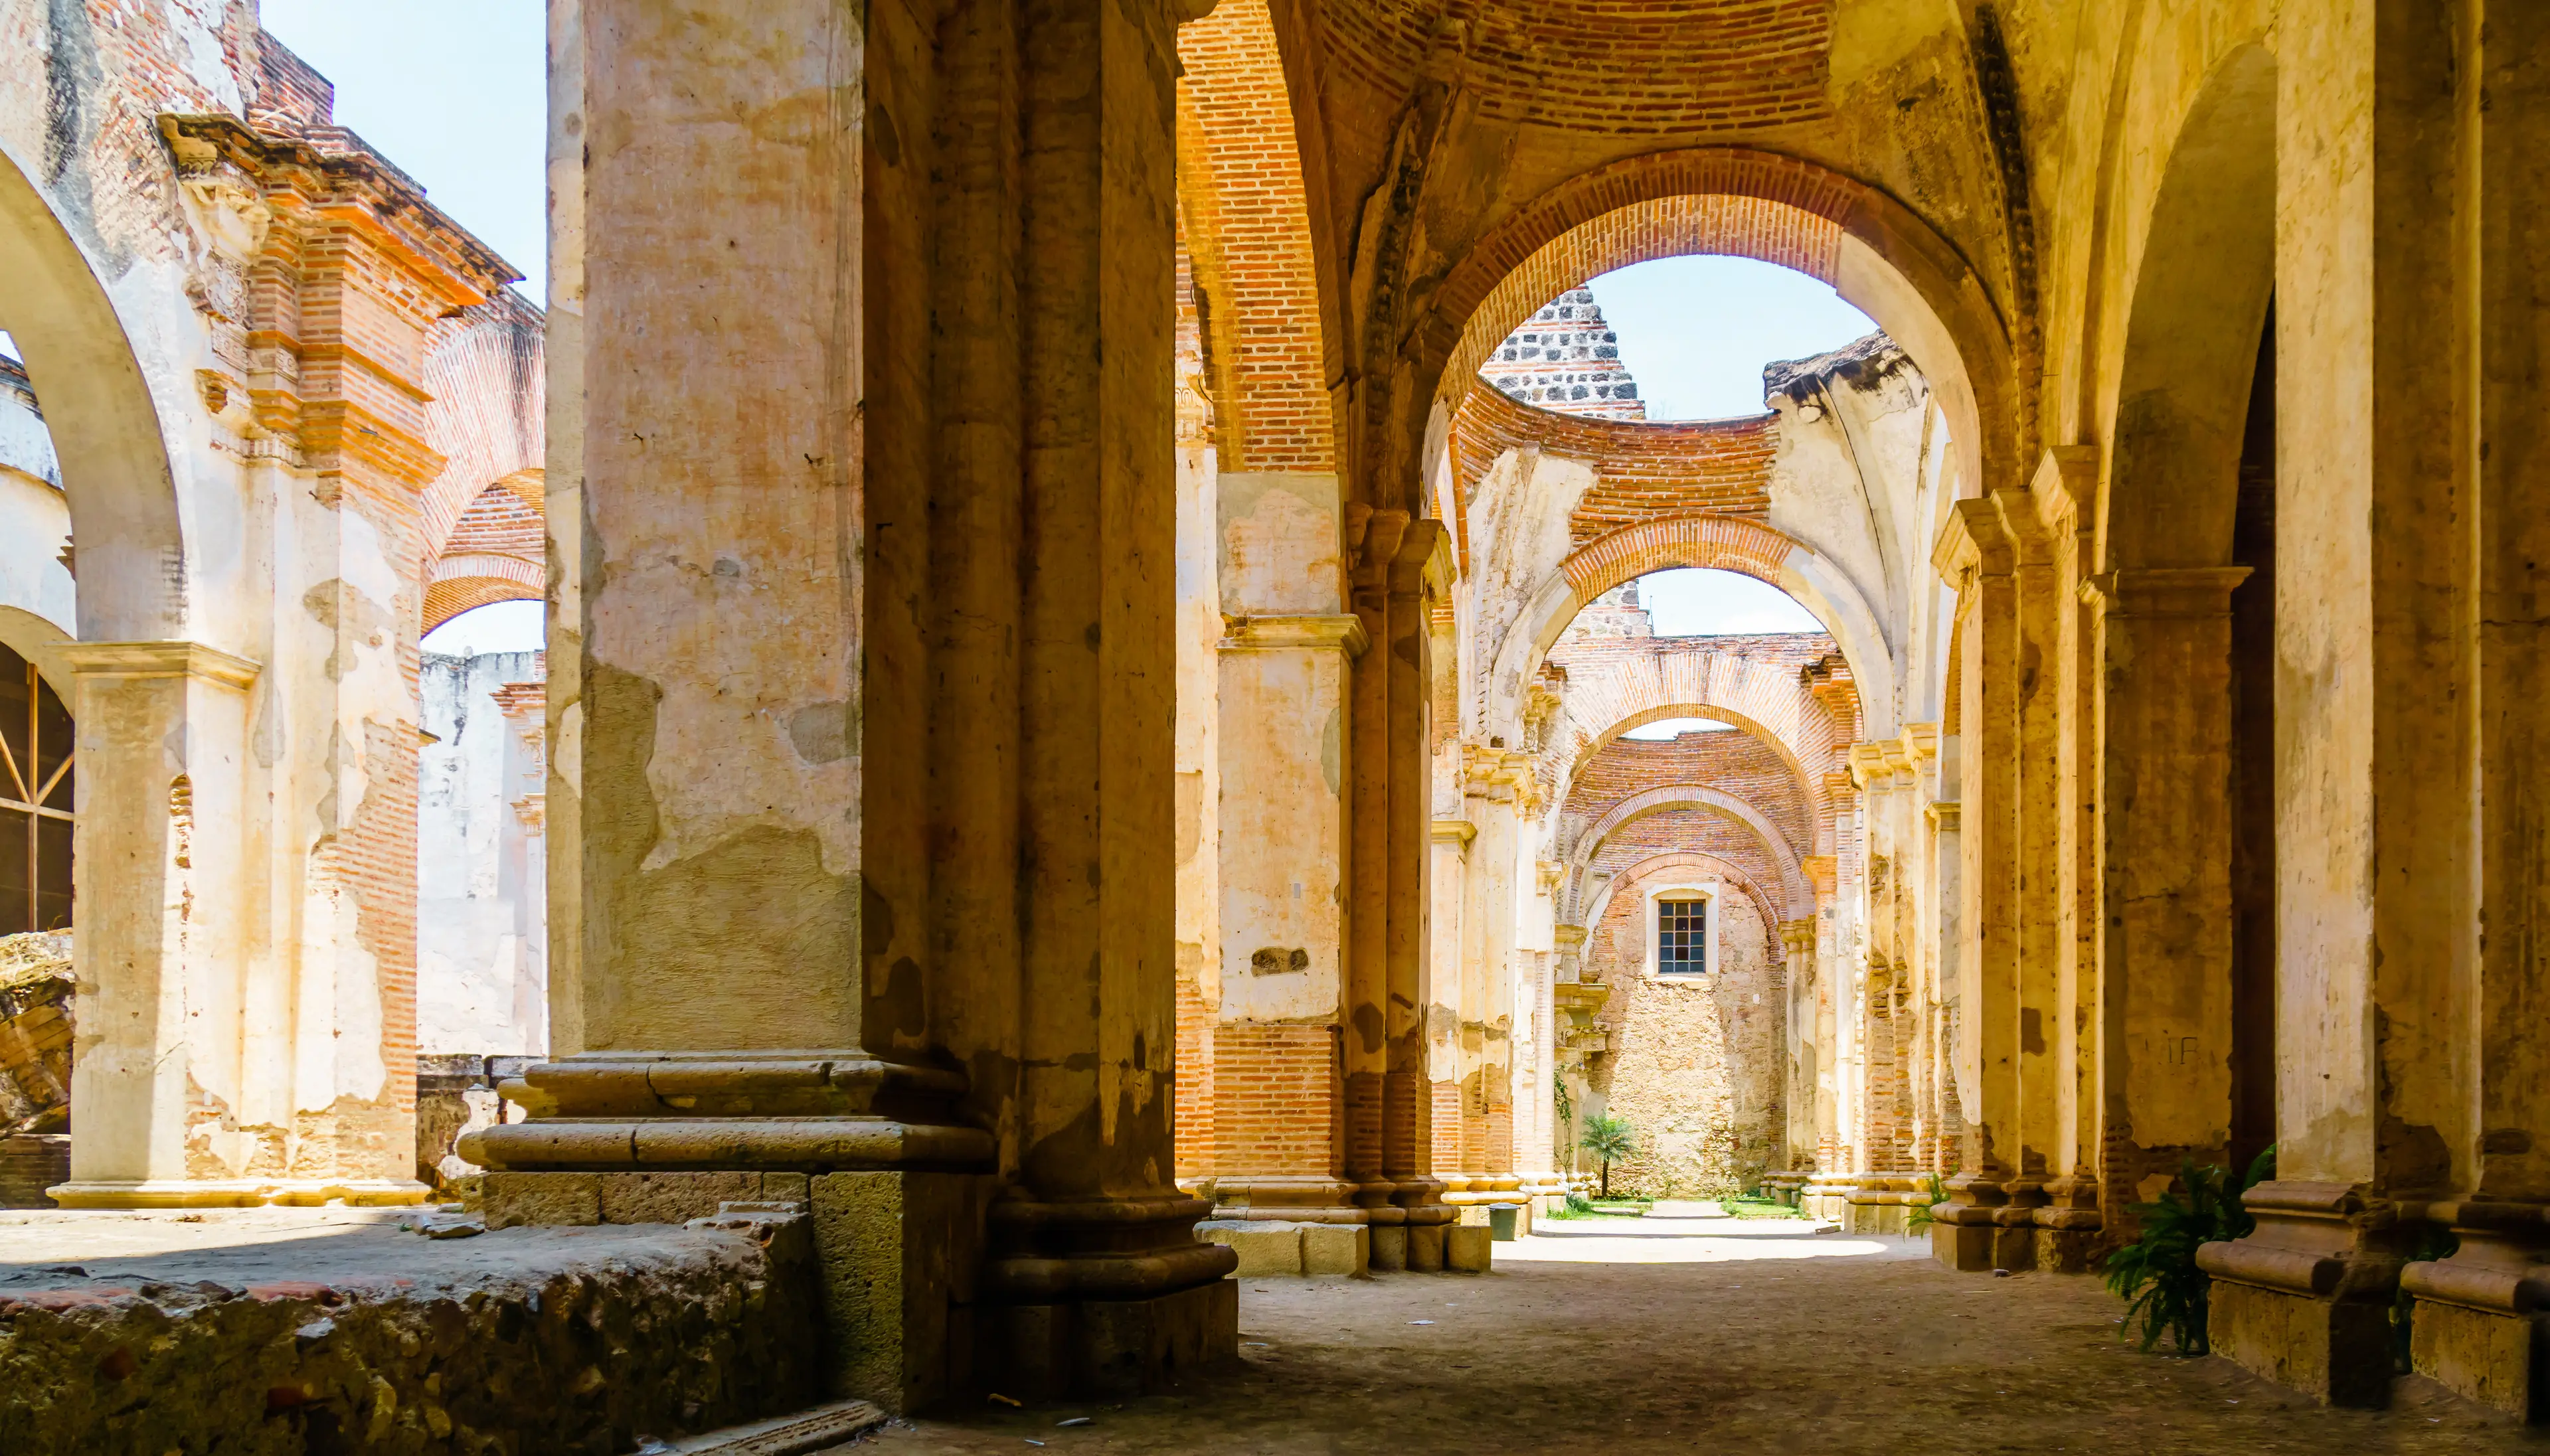 2-Day Solo Local Experience: Sightseeing & Gastronomy in Antigua, Guatemala